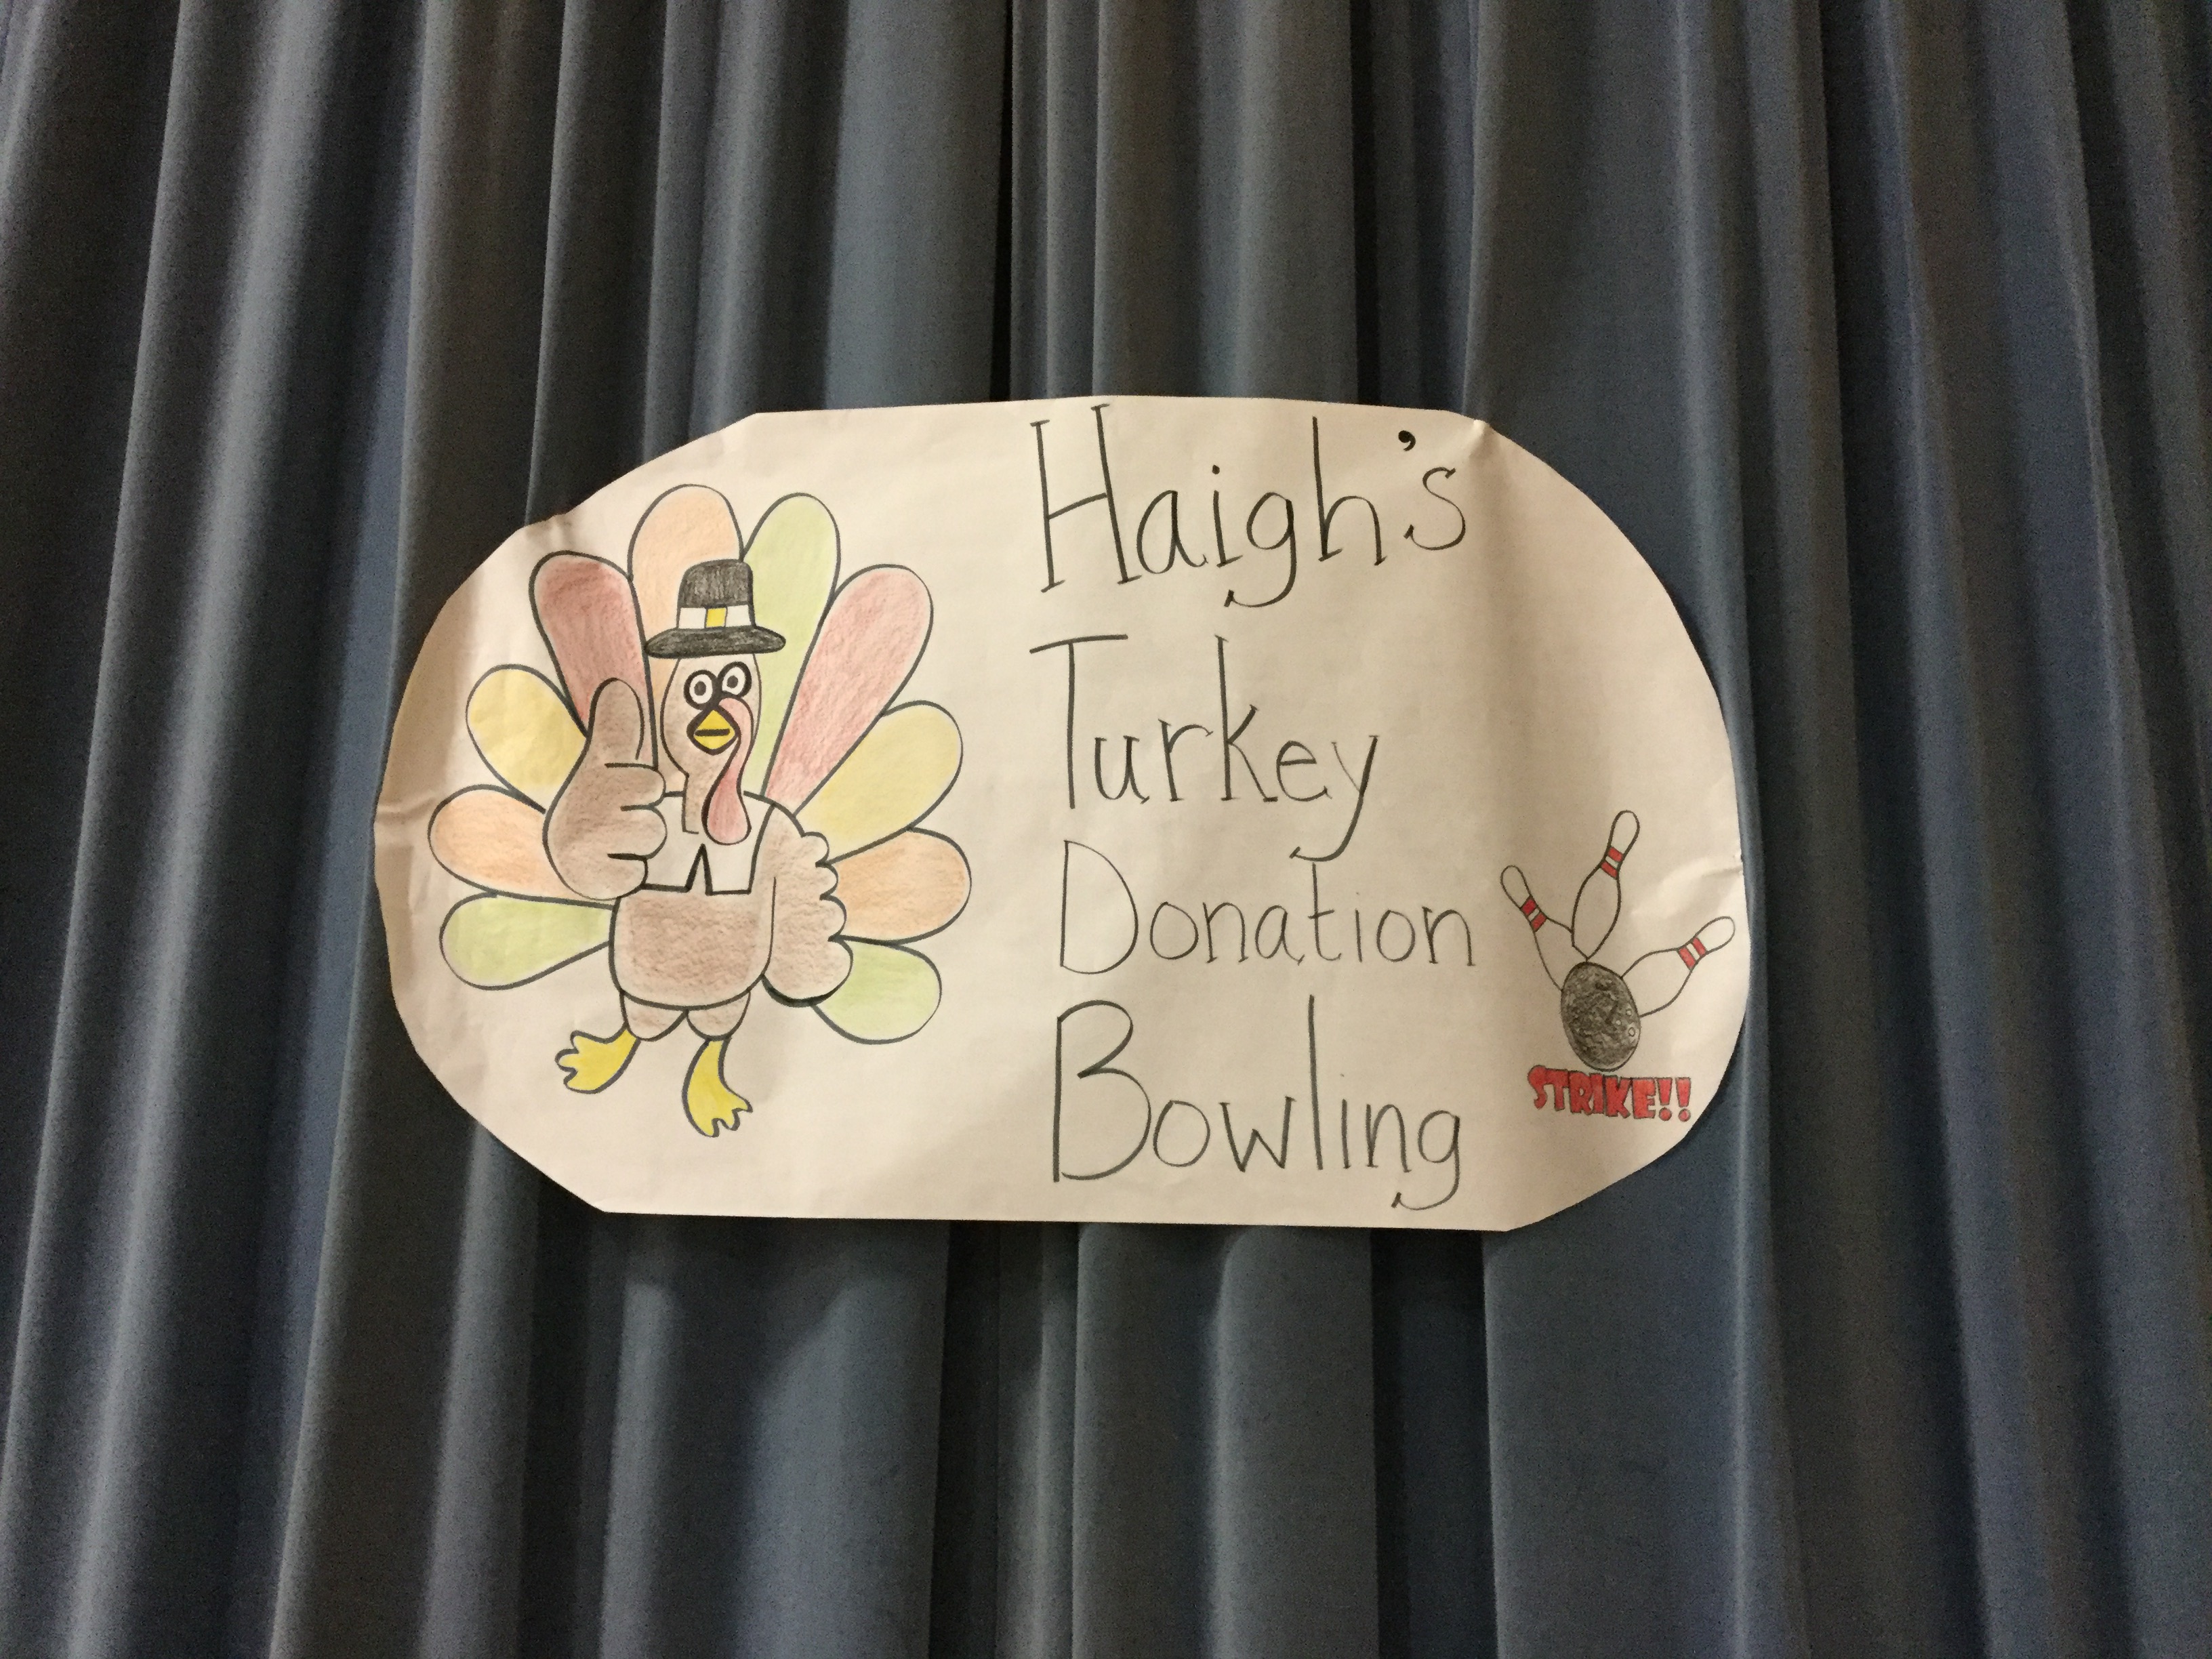 Fun Events at Haigh: PBIS Celebration(Turkey Bowling) and Family Game Night(Learning Gizmos)